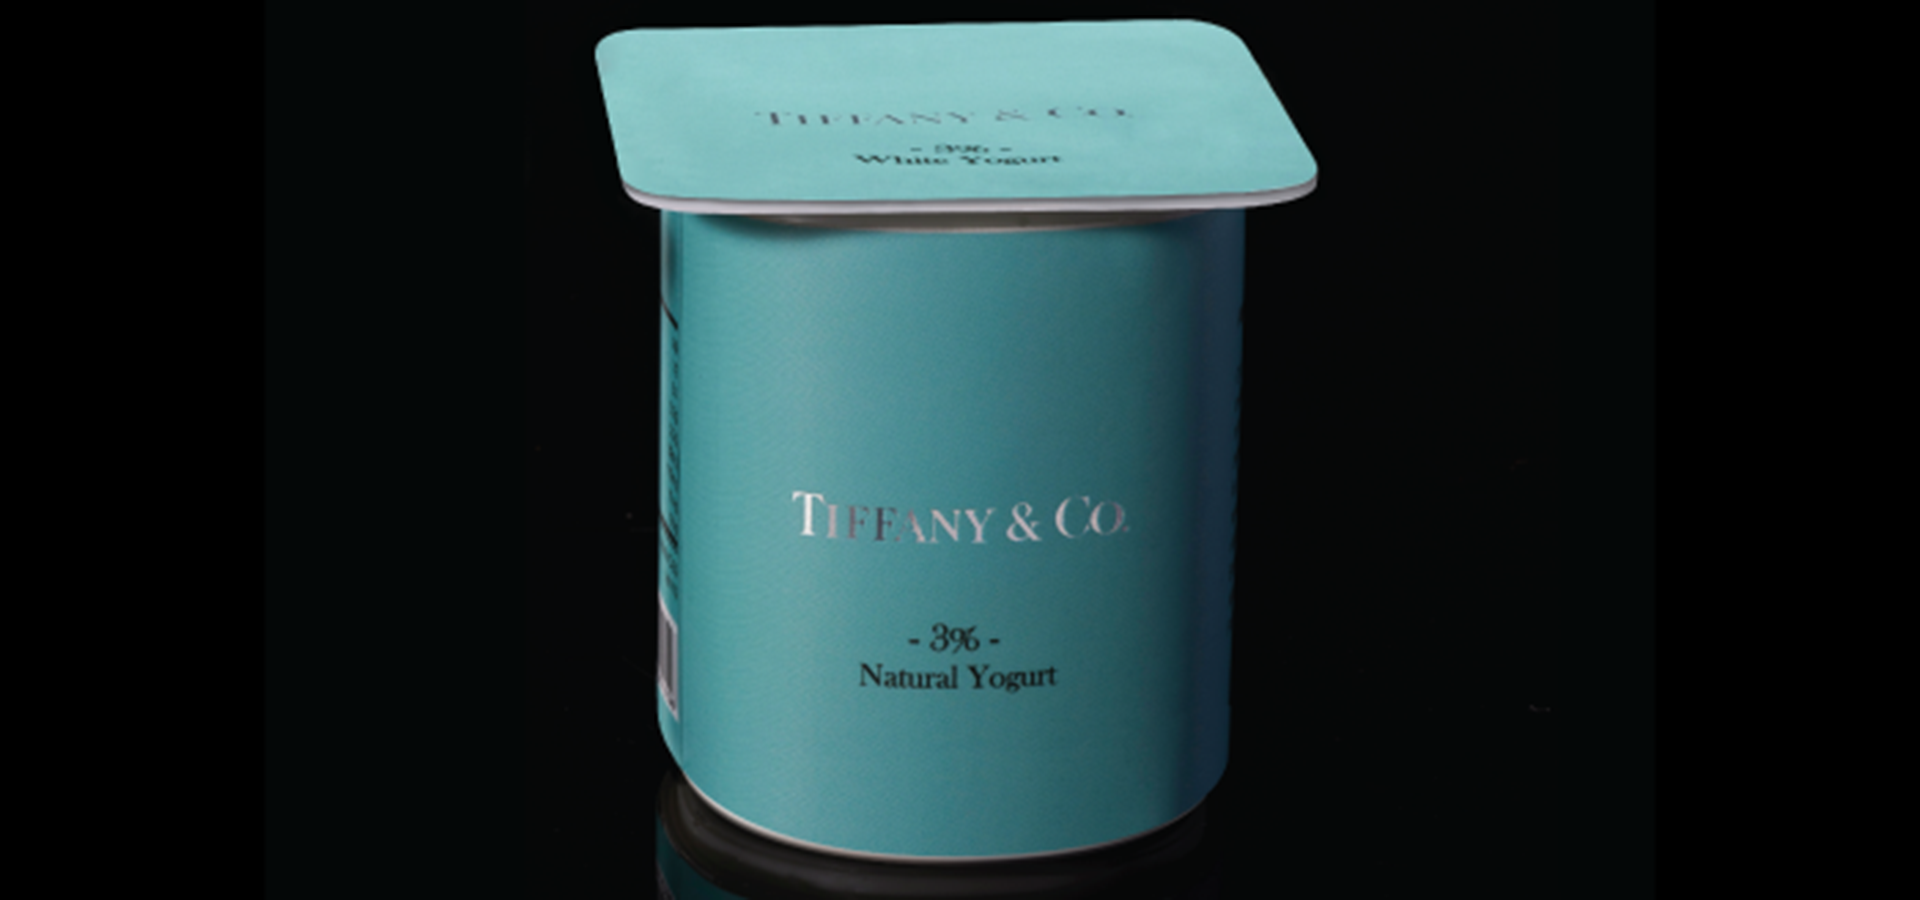 Photo of an artwork that is a tiffany co. yogurt container